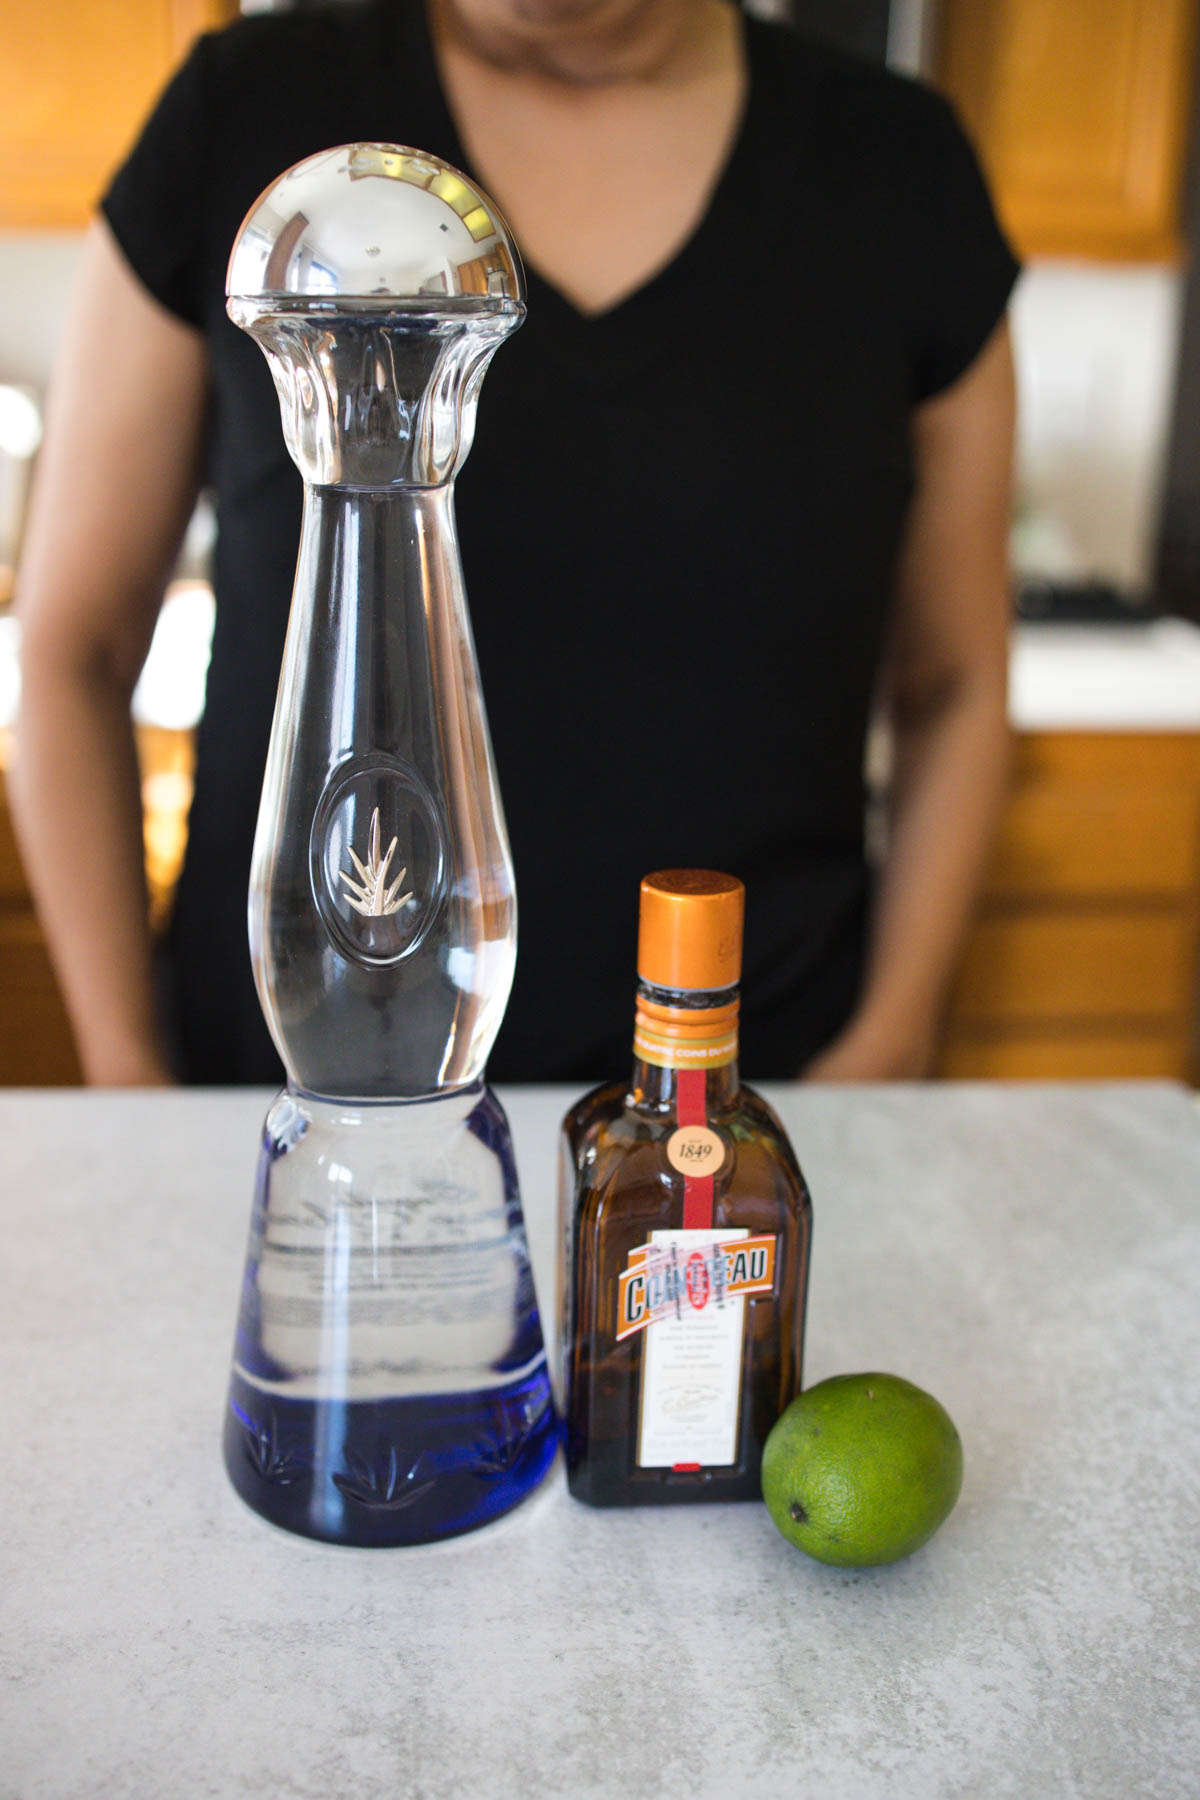 A bottle of Clase Azul Tequila Plata, Cointreau, and fresh lime on top of a counter.